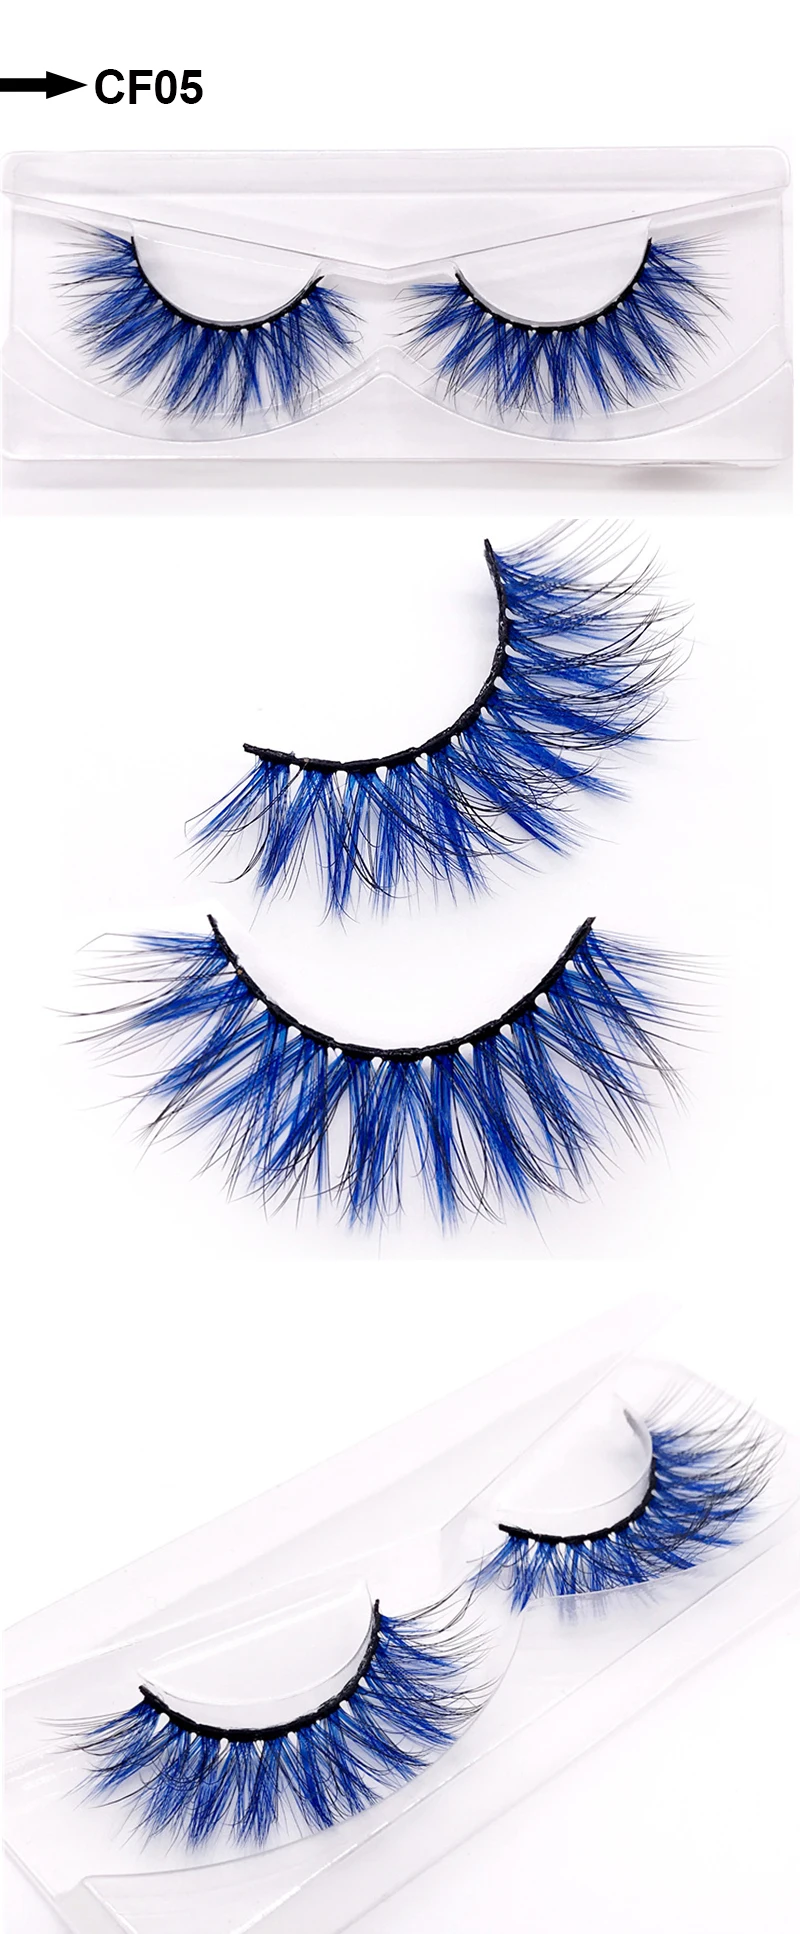 Okaylash 3d Dramatic Cruelty Faux Mink Colored Eyelashes Natural Long Colorful Blue Eye Lashes For Cosplay Party Make Up -Outlet Maid Outfit Store H723dea04c8824247a89e5b1d5a808c9cA.jpg